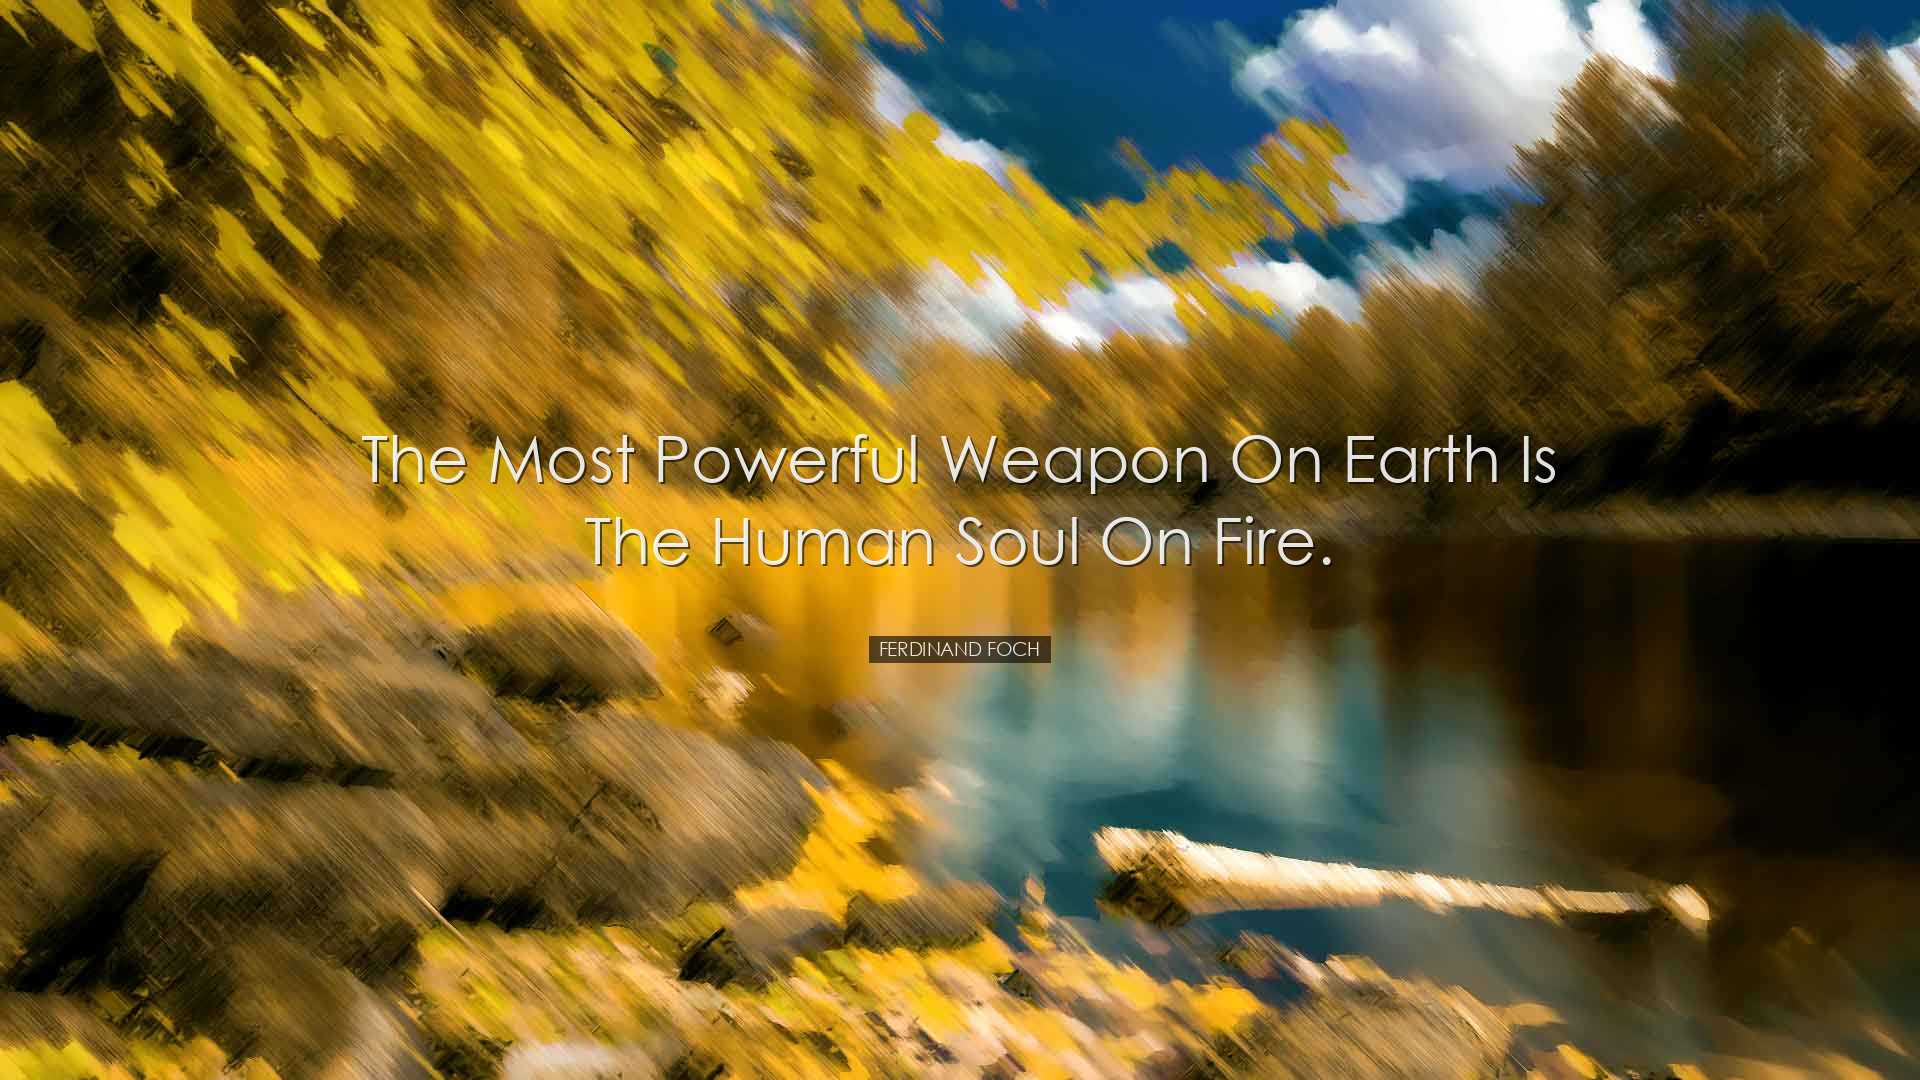 The most powerful weapon on earth is the human soul on fire. - Fer